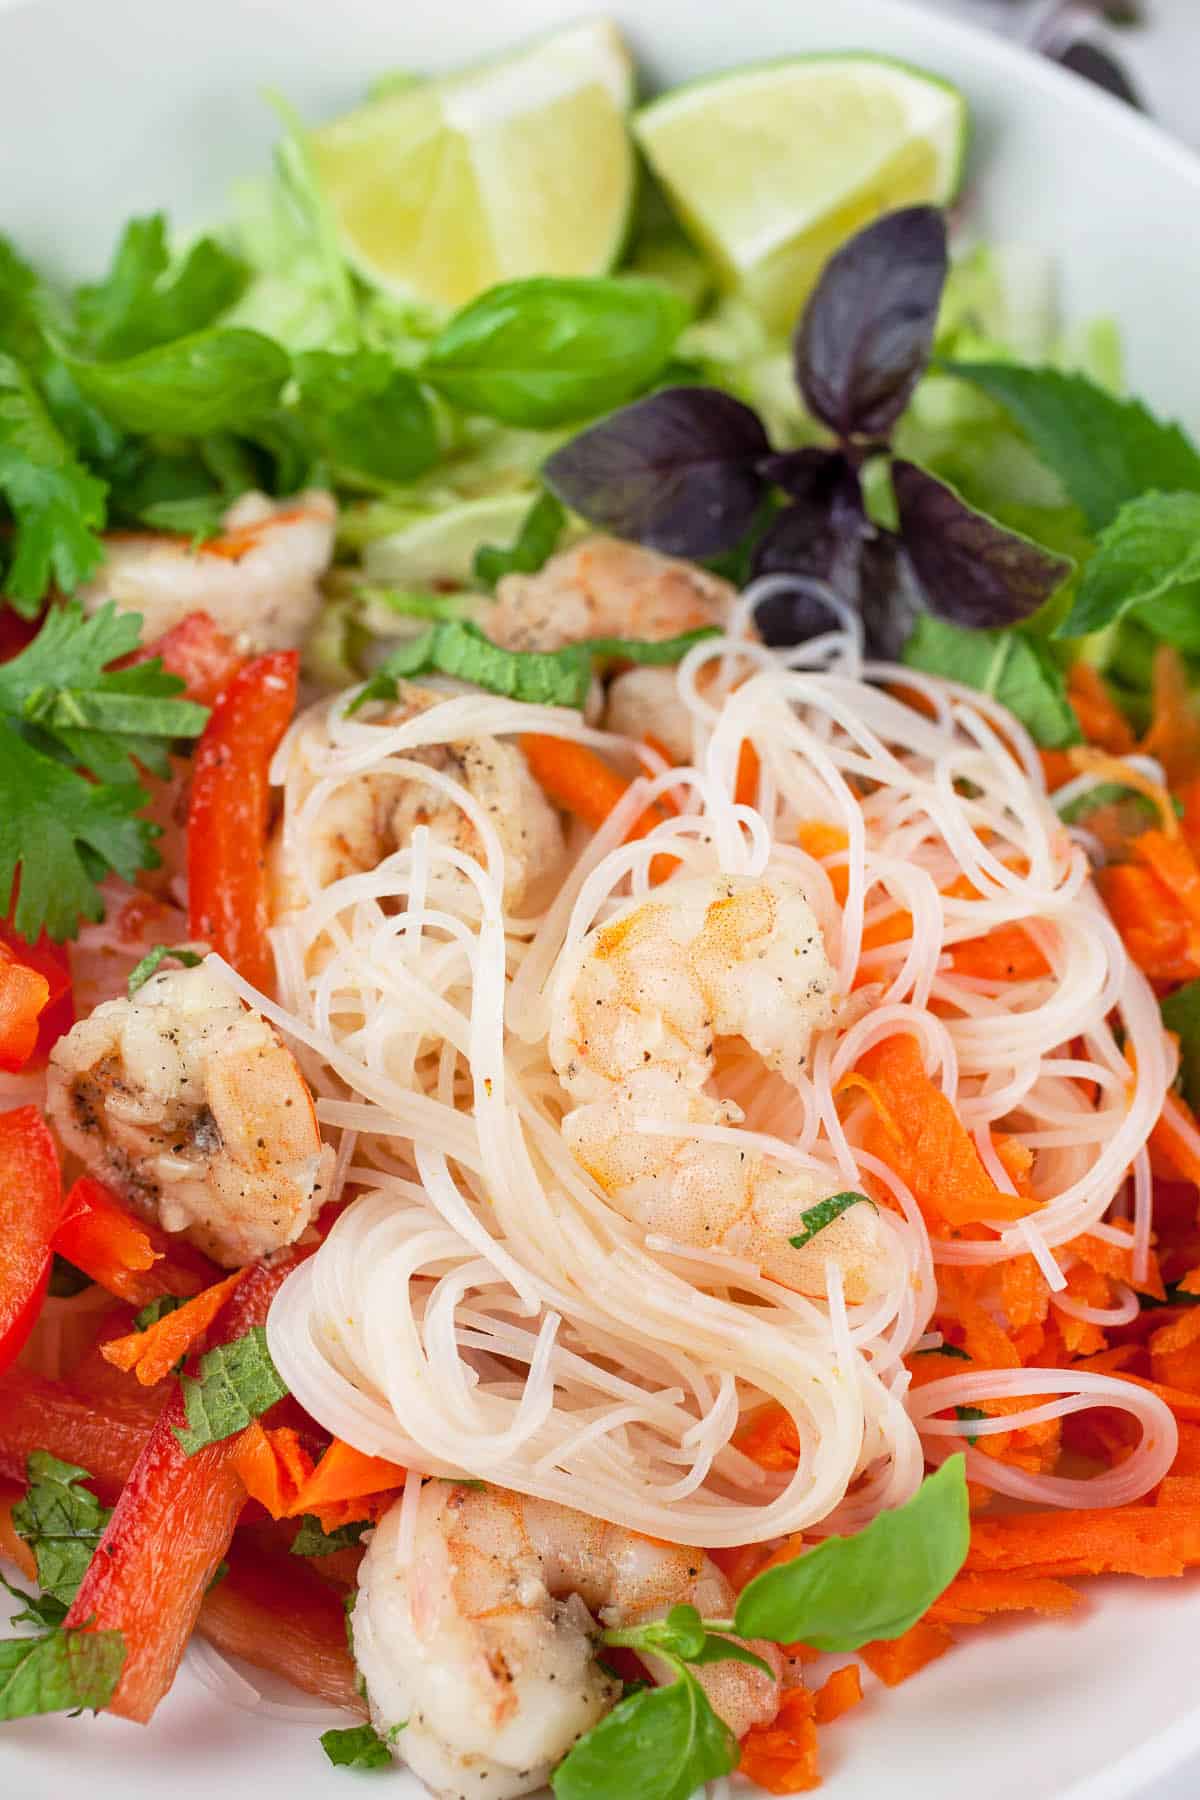 Vietnamese noodle salad with shrimp, veggies, and herbs in white bowl.